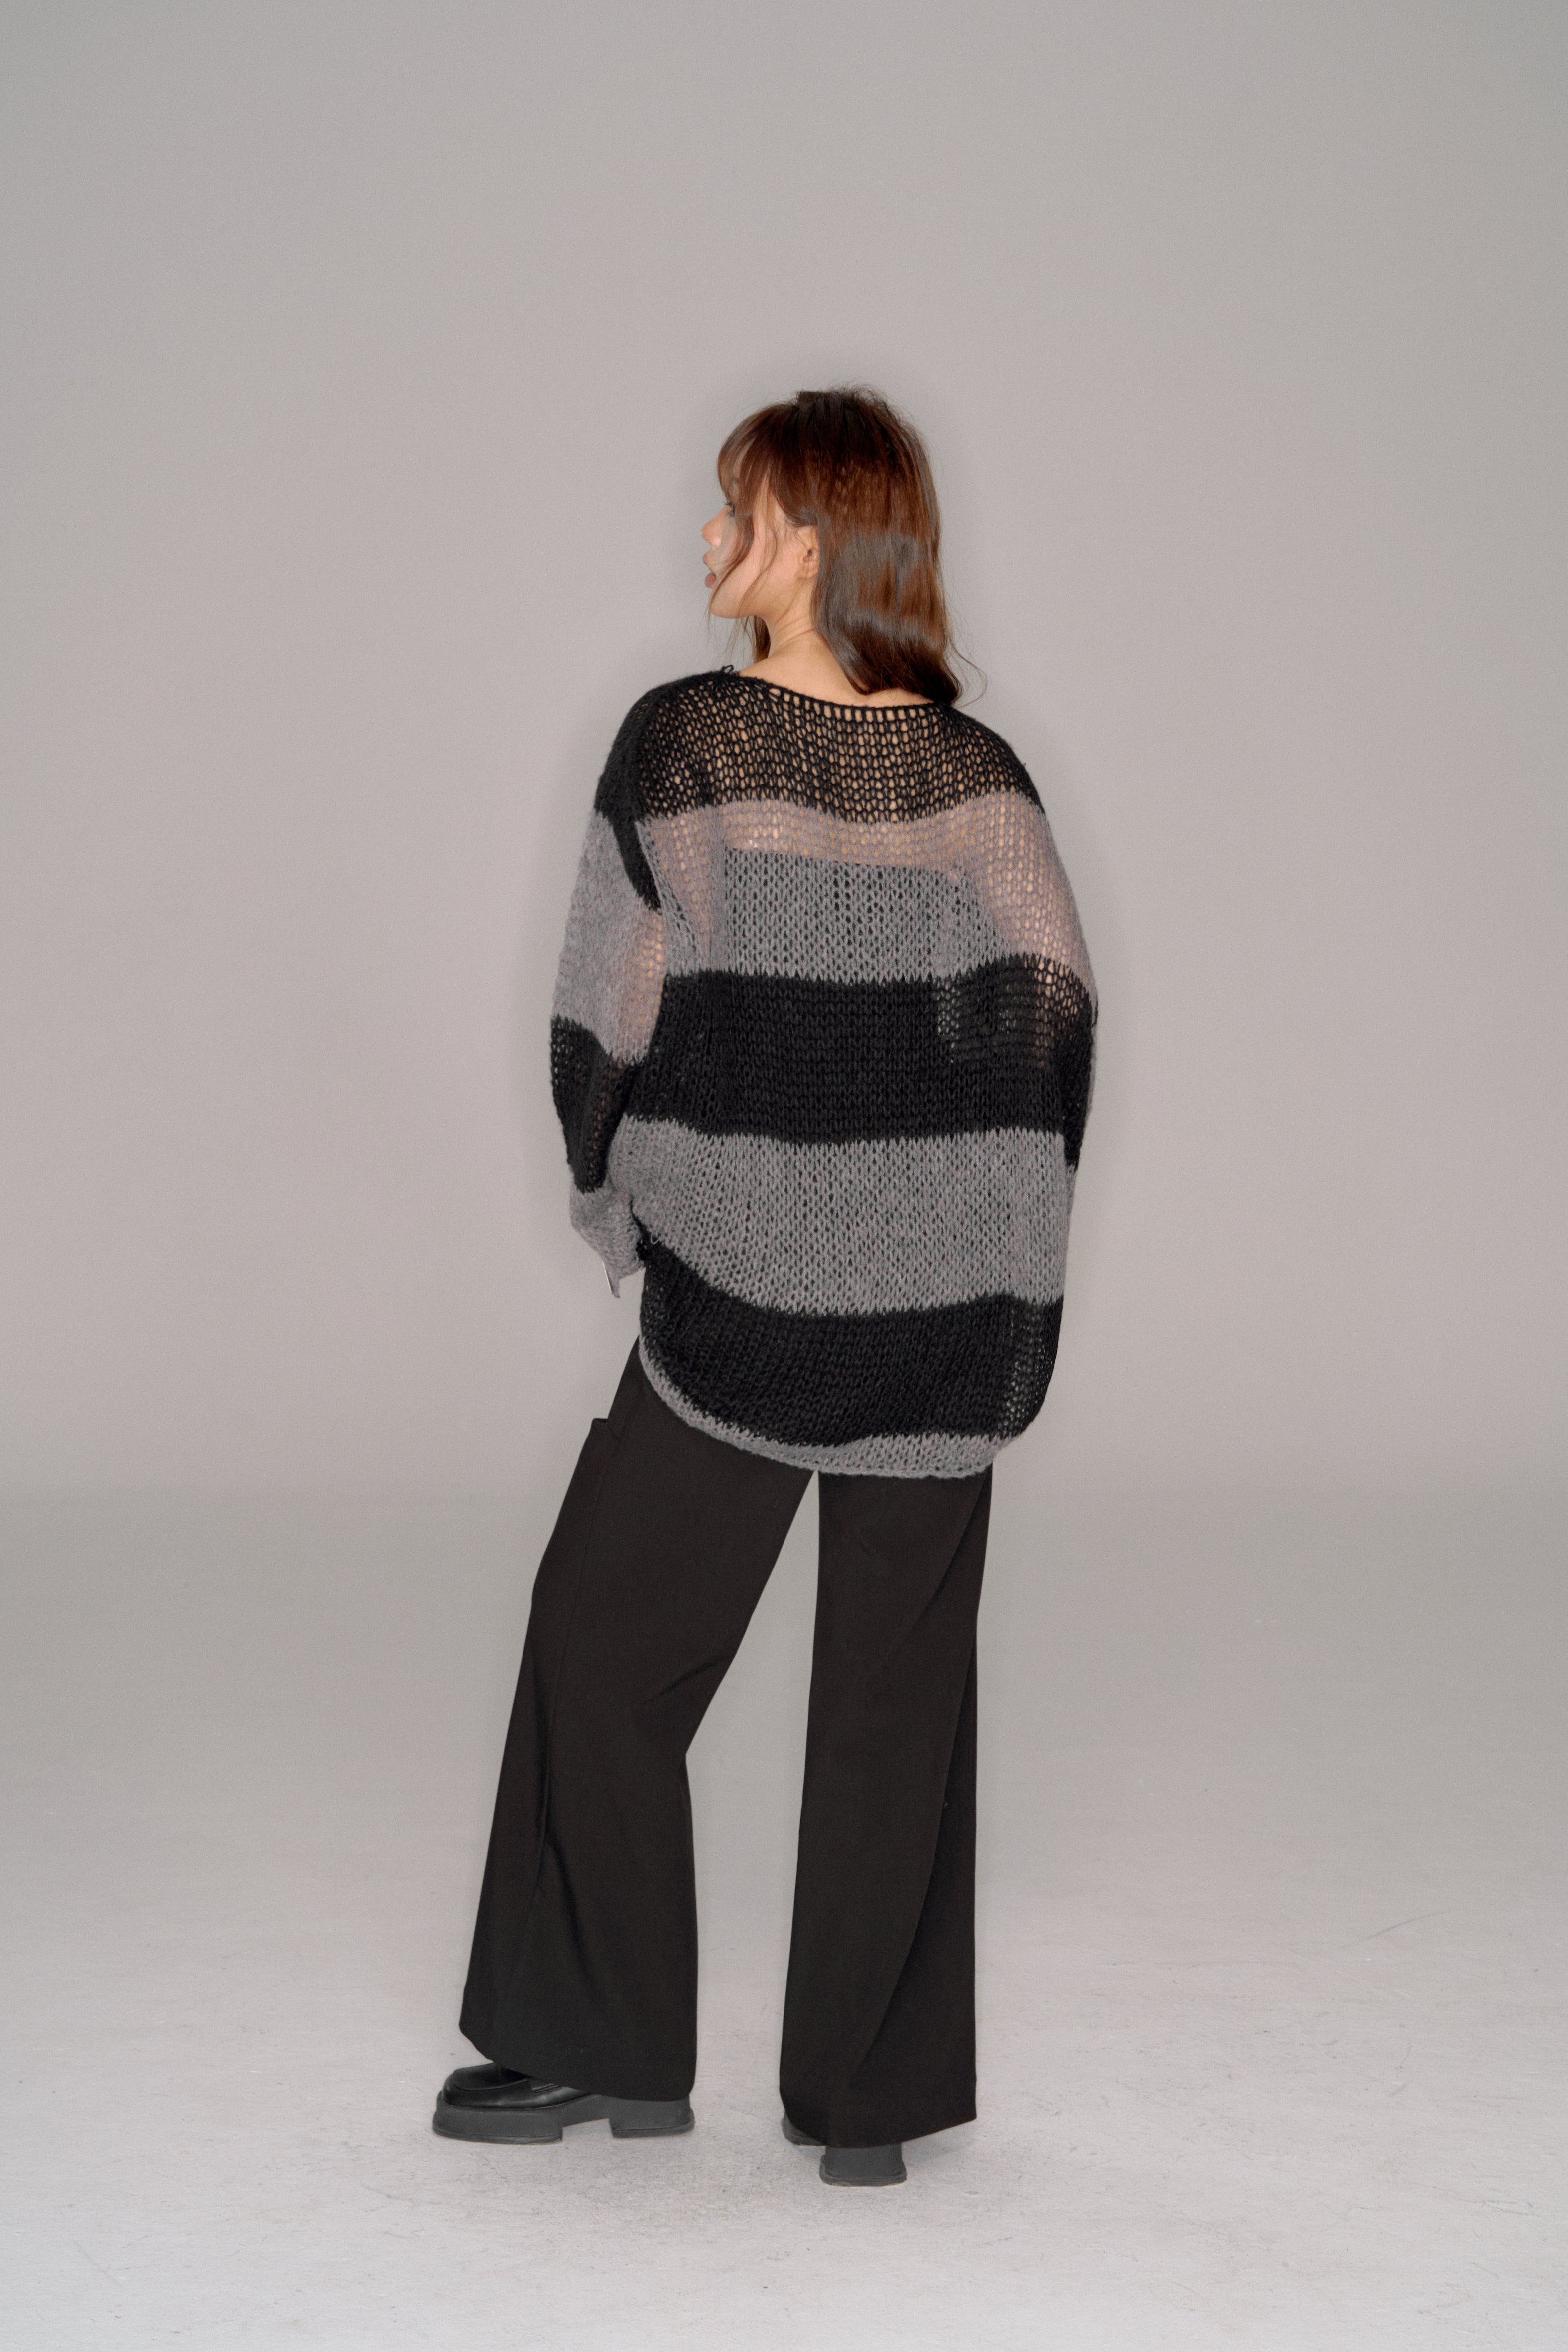 border over knit tops